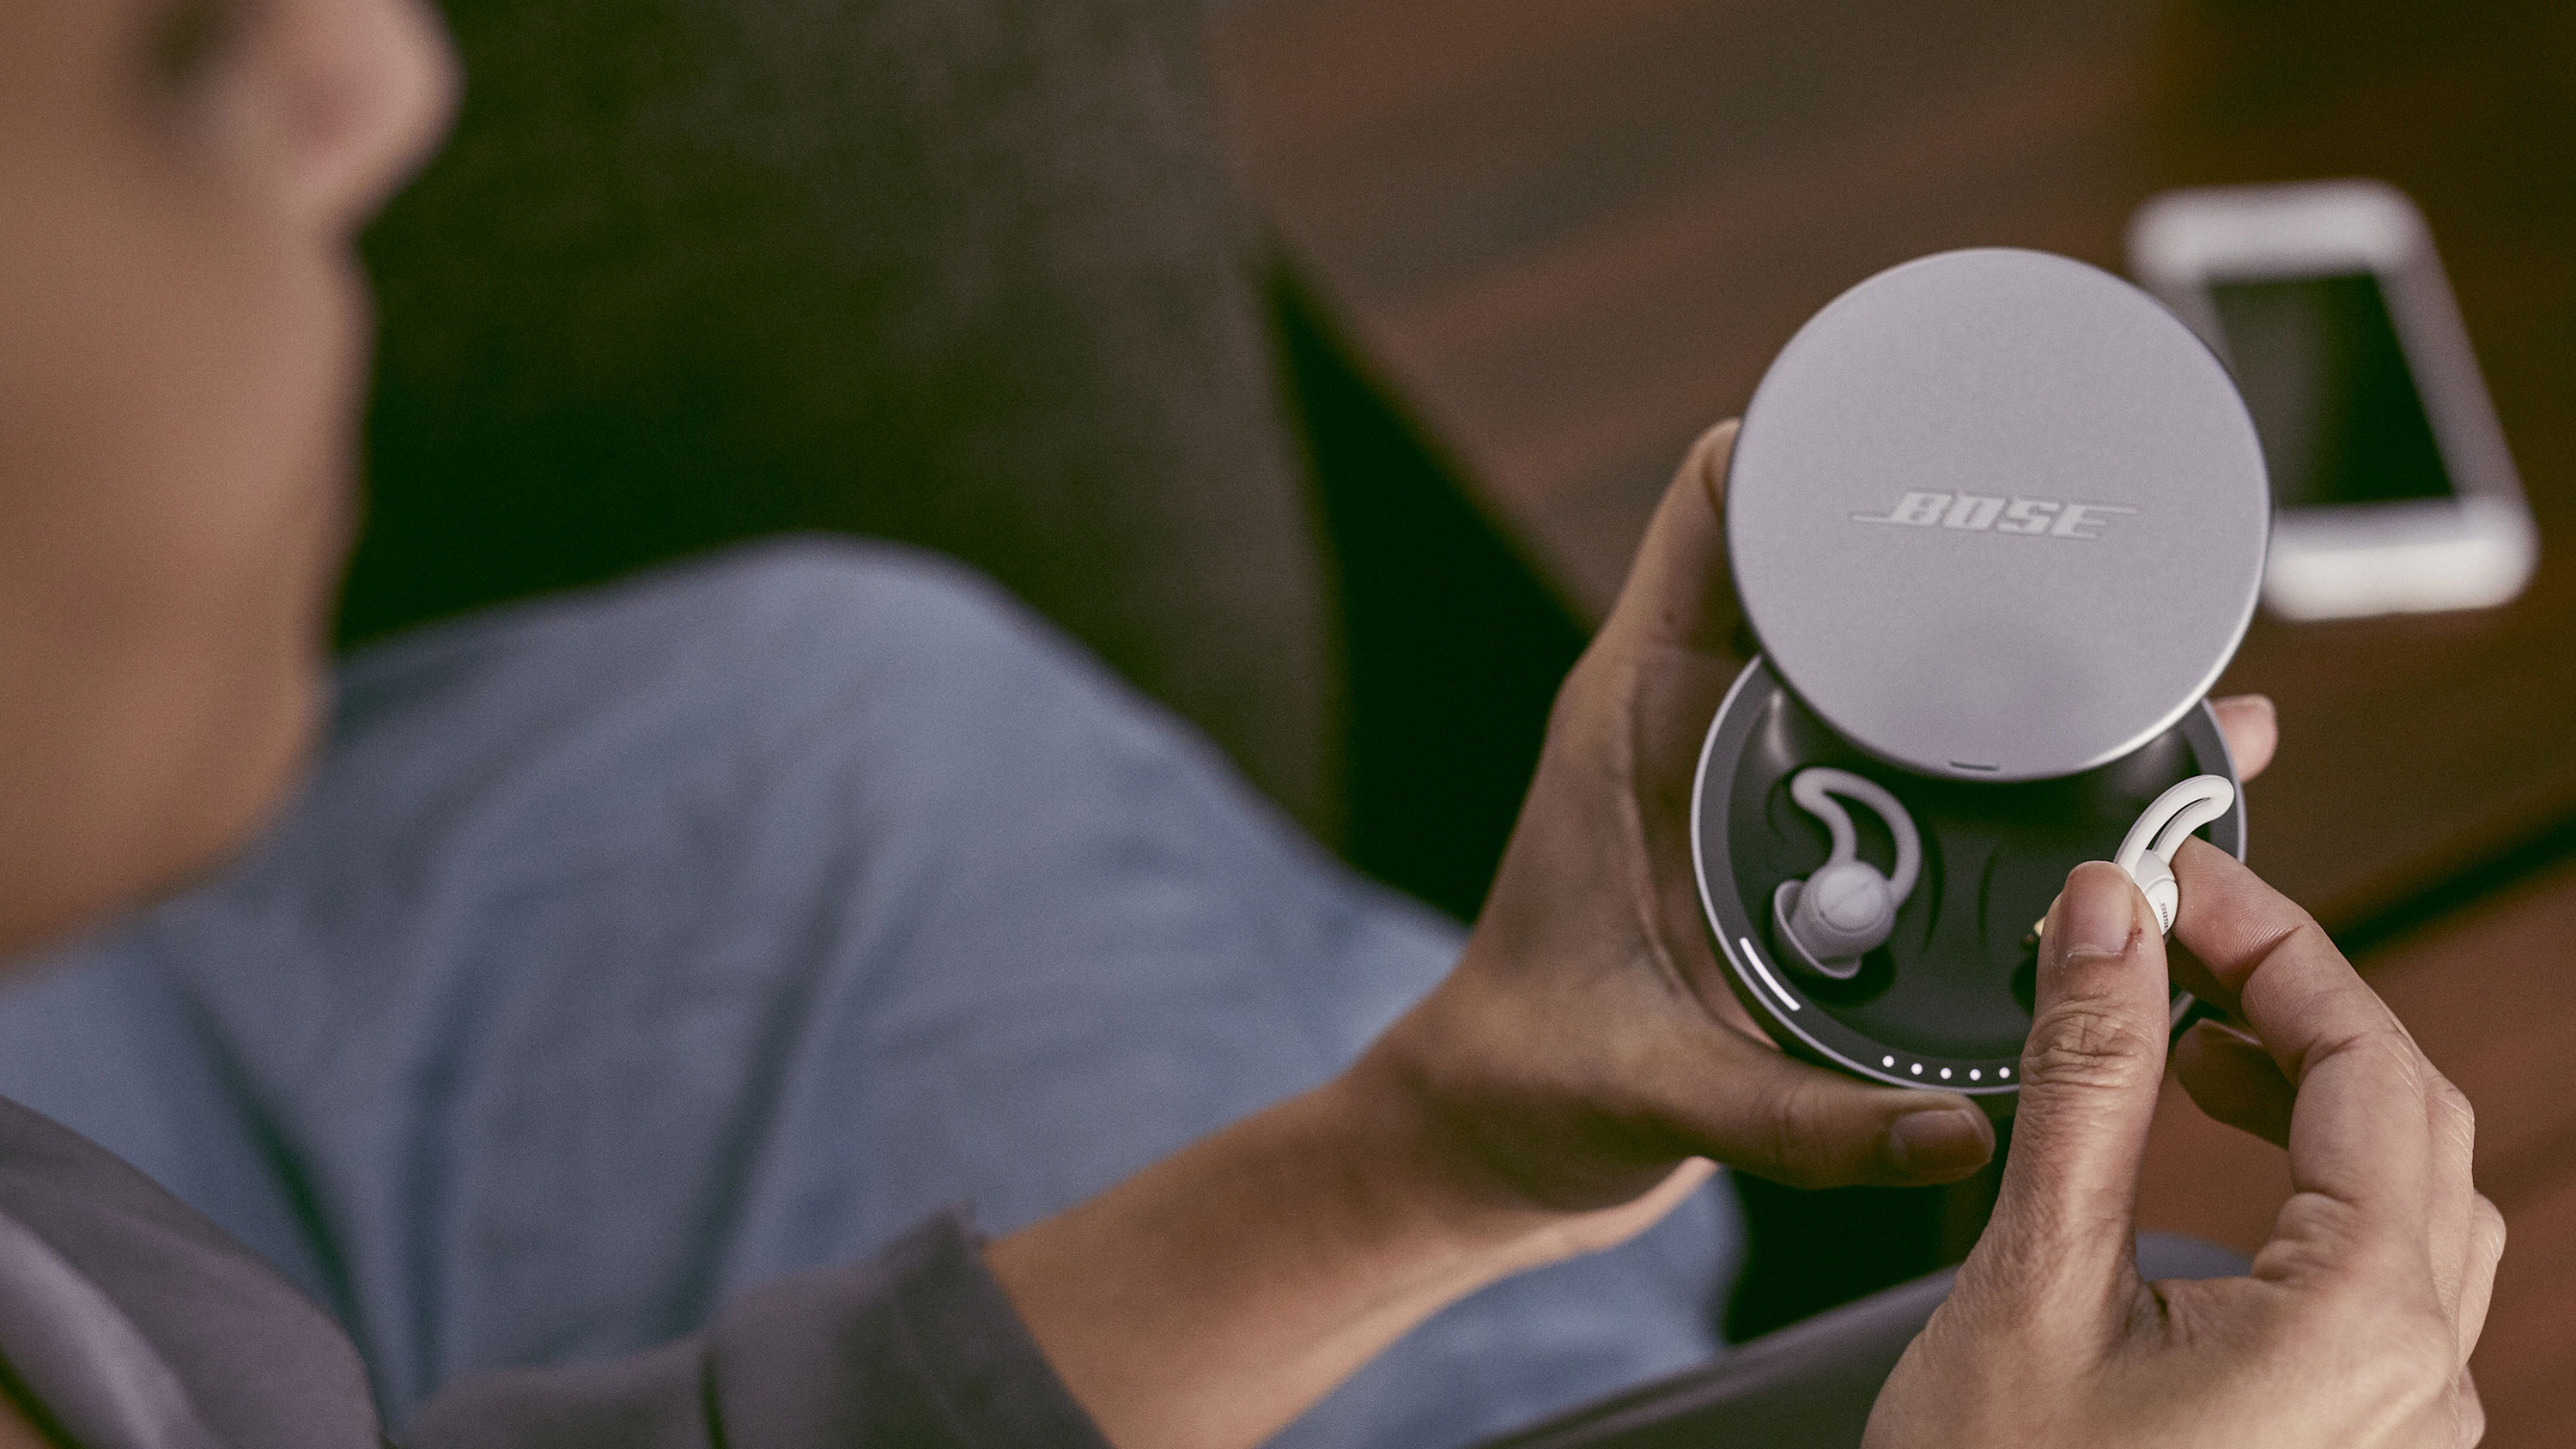 The Bose Sleepbuds inside the charging case